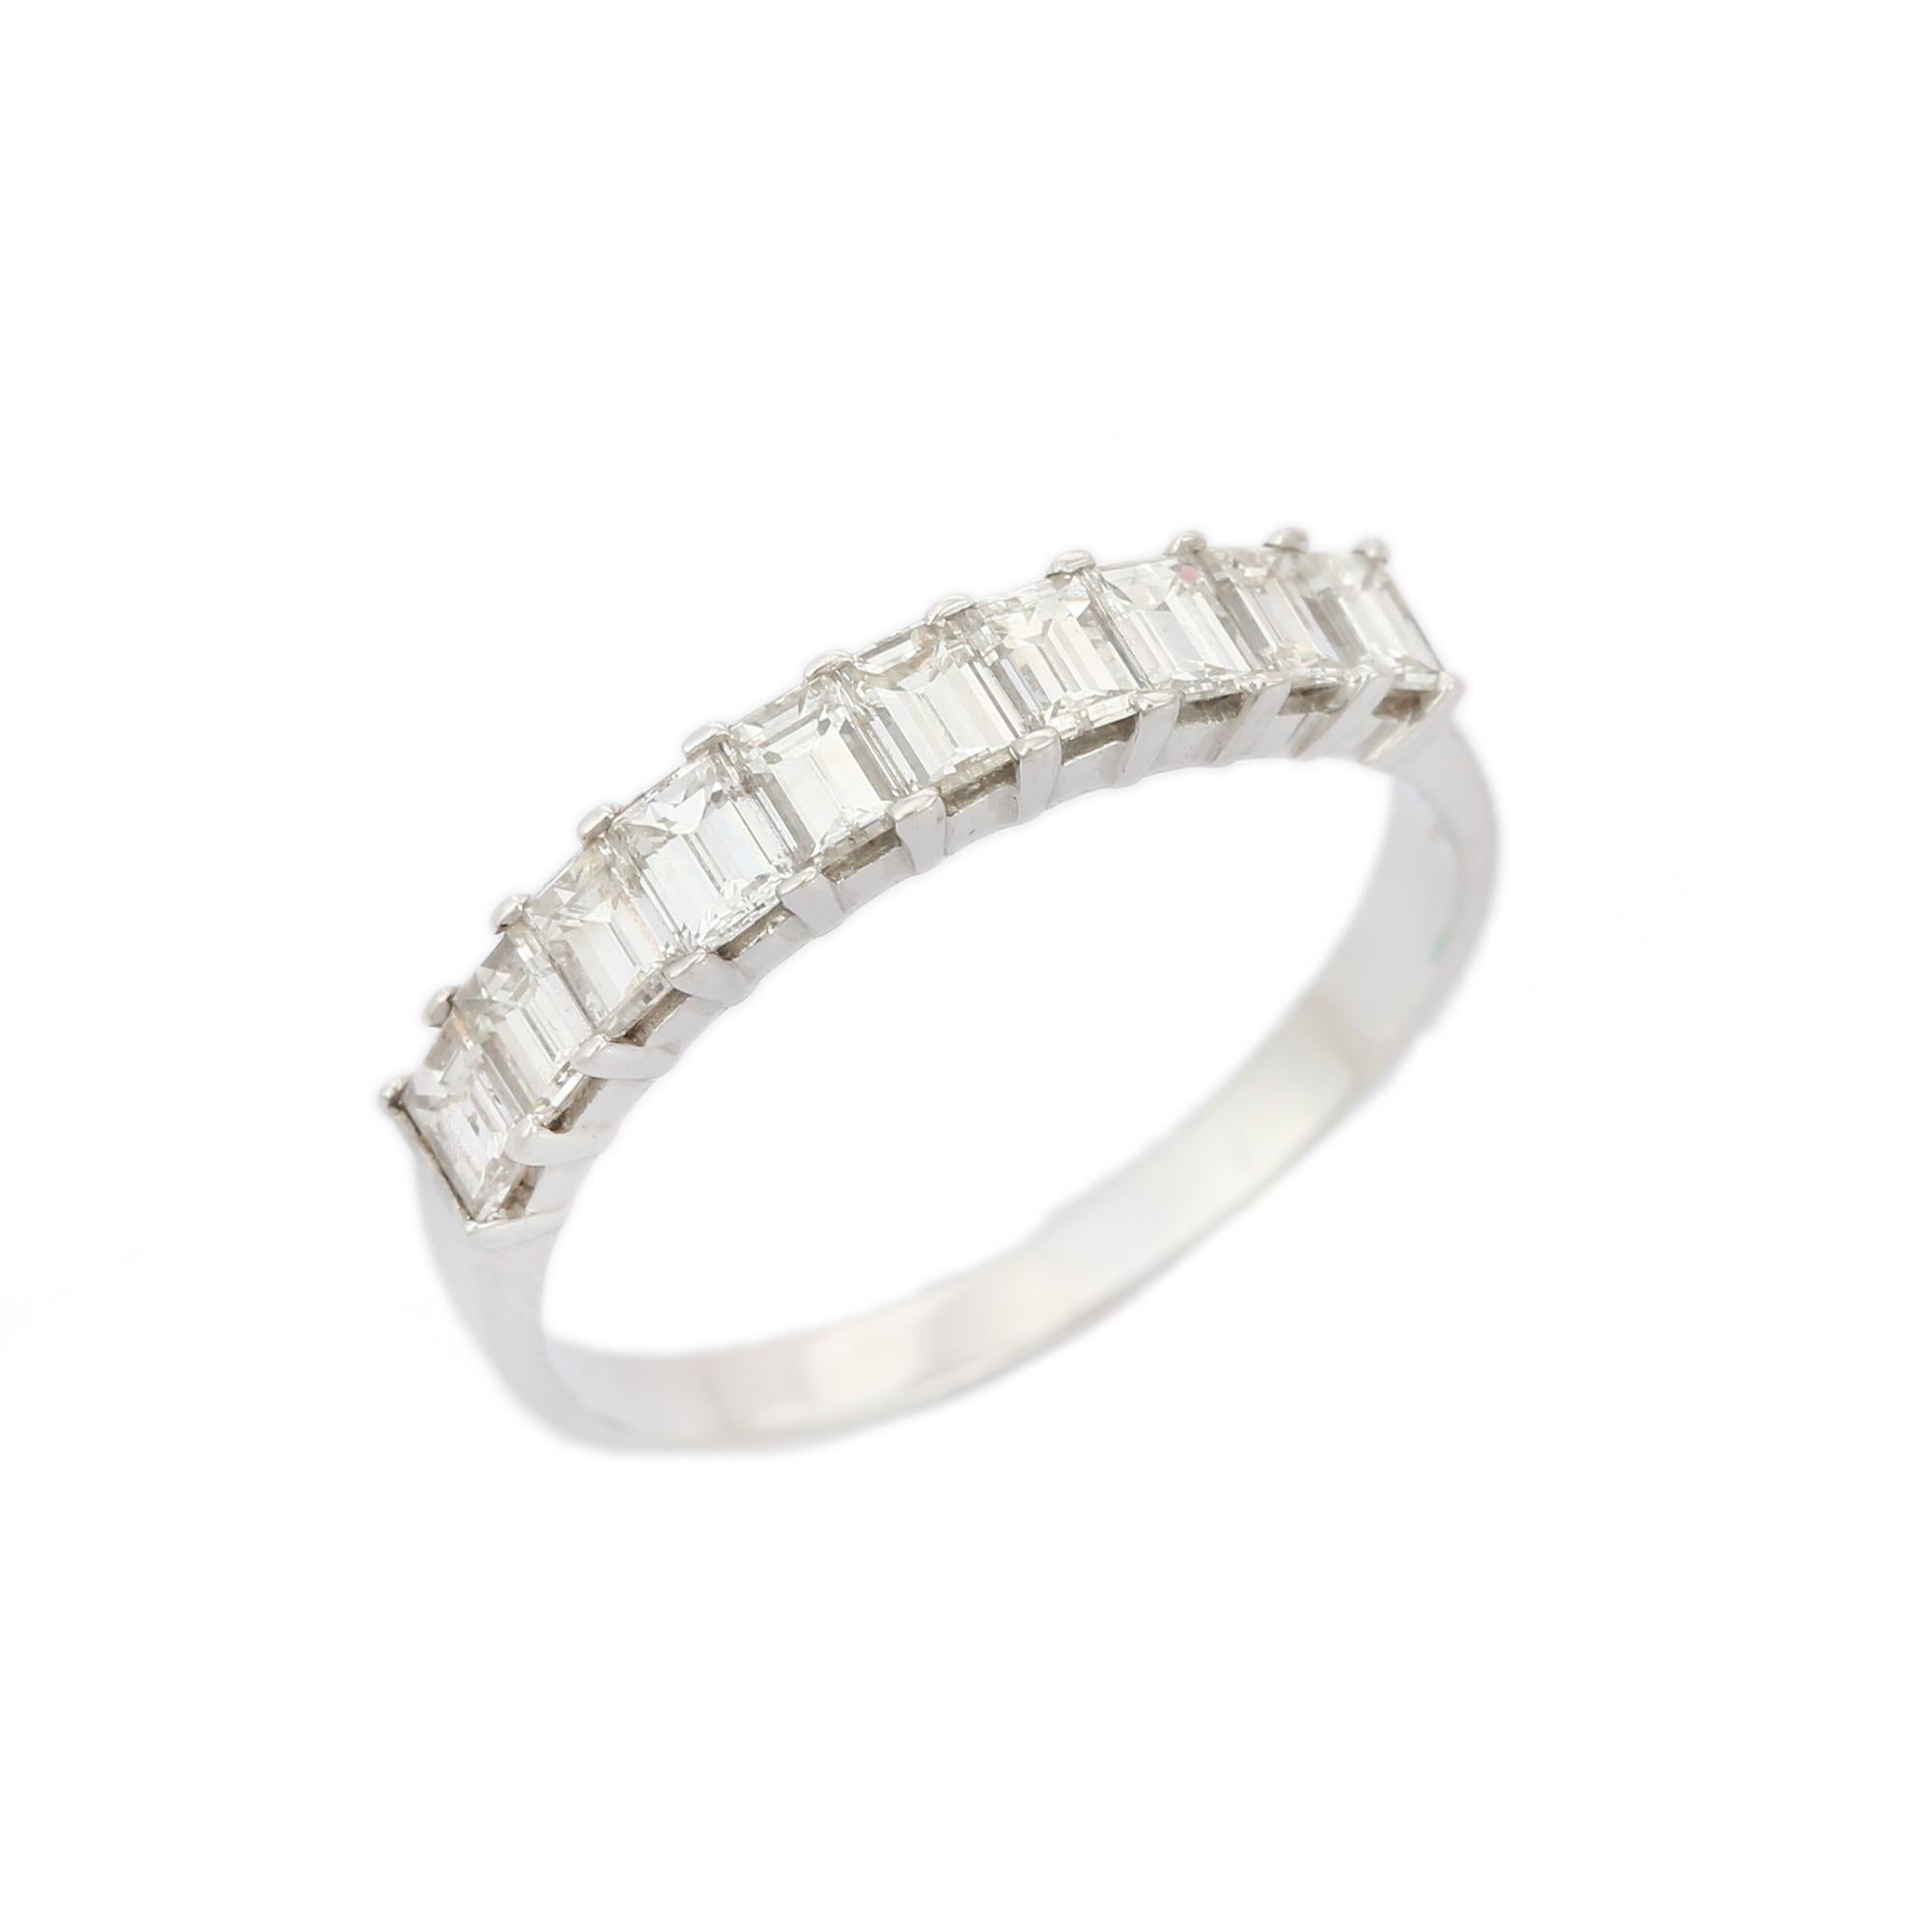 For Sale:  1.25 Carat Emerald Cut Diamond Half Eternity Band Ring in 18K White Gold  2